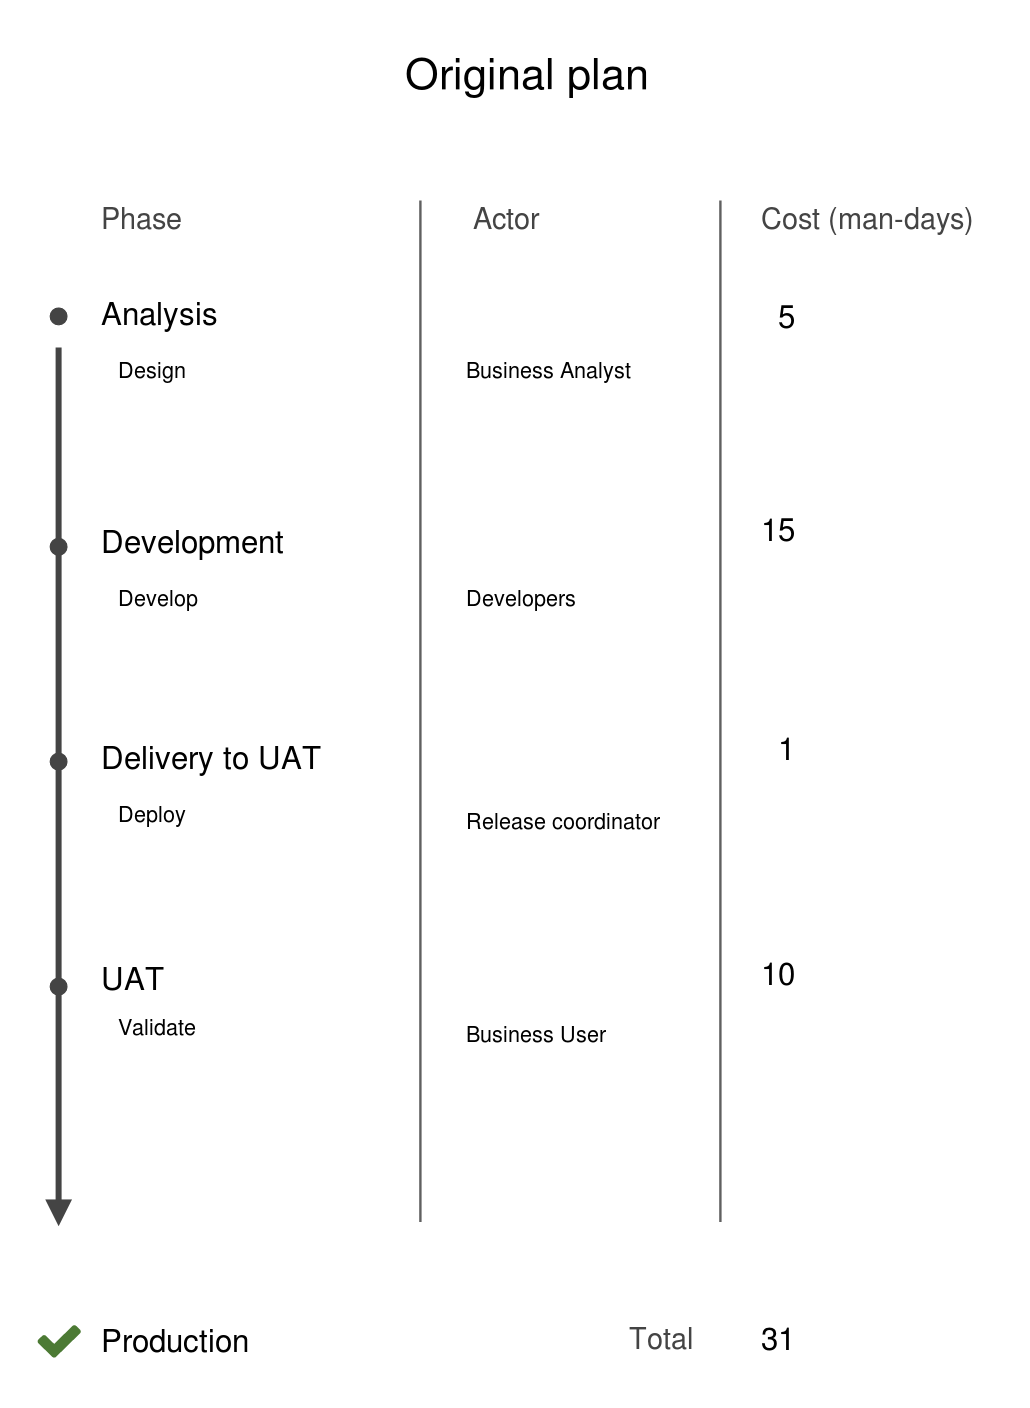 Original project plan diagram, four project phases have an estimated cost of 31 man-days